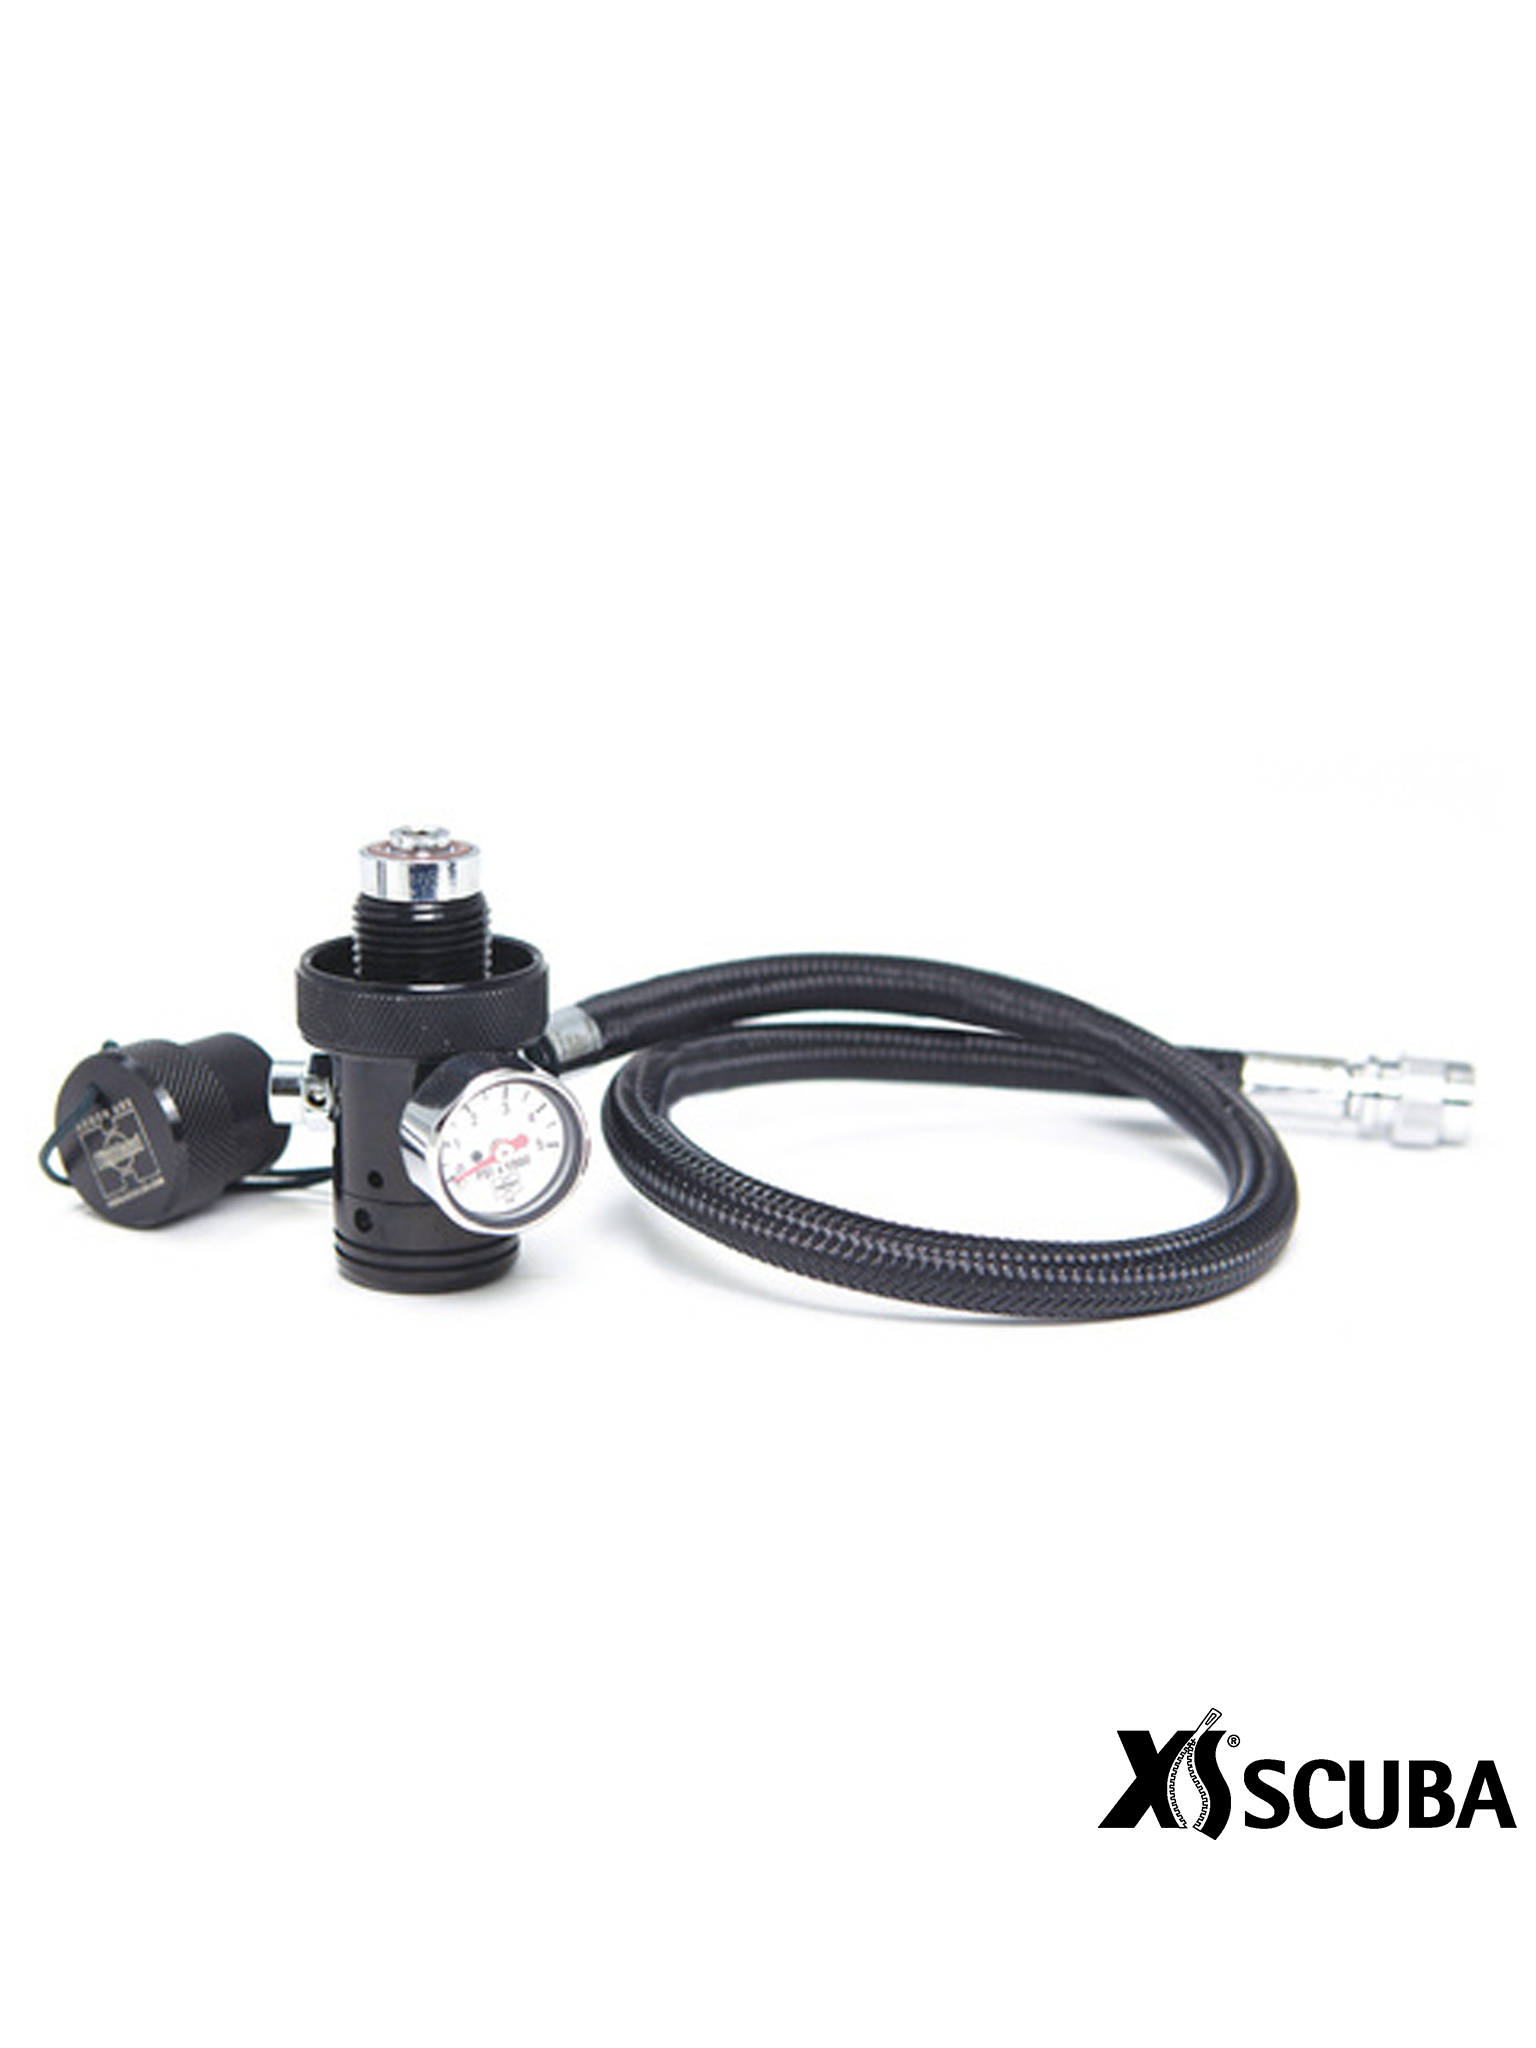 XS Scuba Compact DIN First Stage 